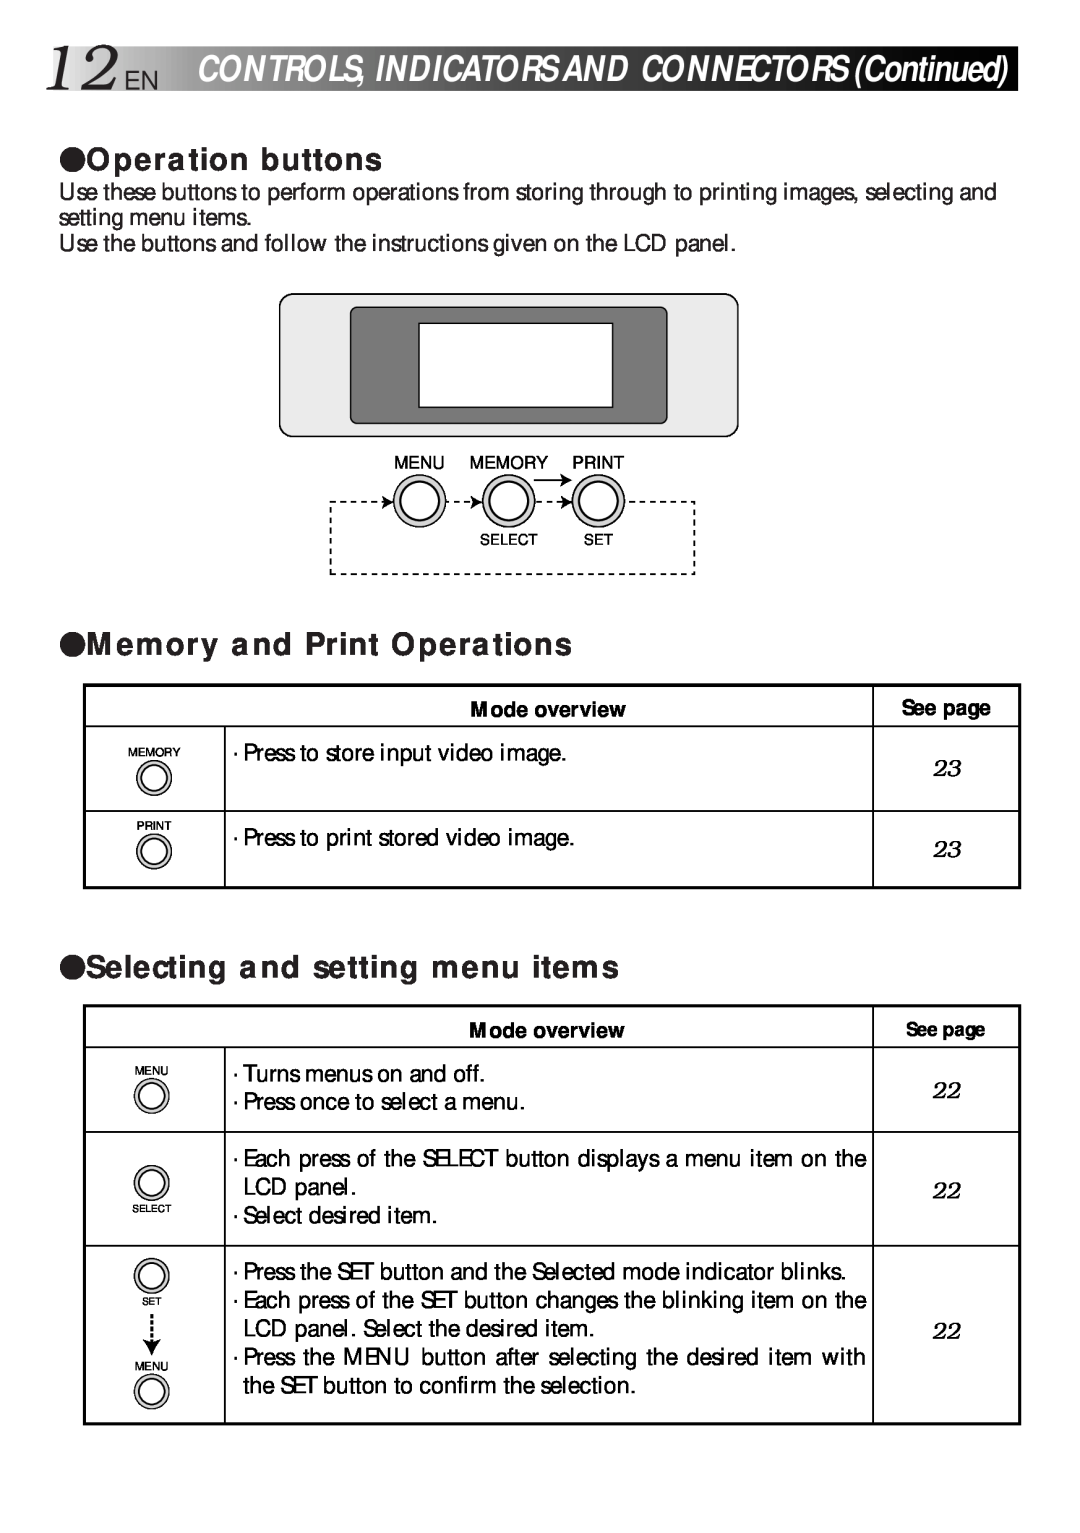 JVC GV-HT1 manual 12EN, Operation buttons, Memory and Print Operations, Selecting and setting menu items 